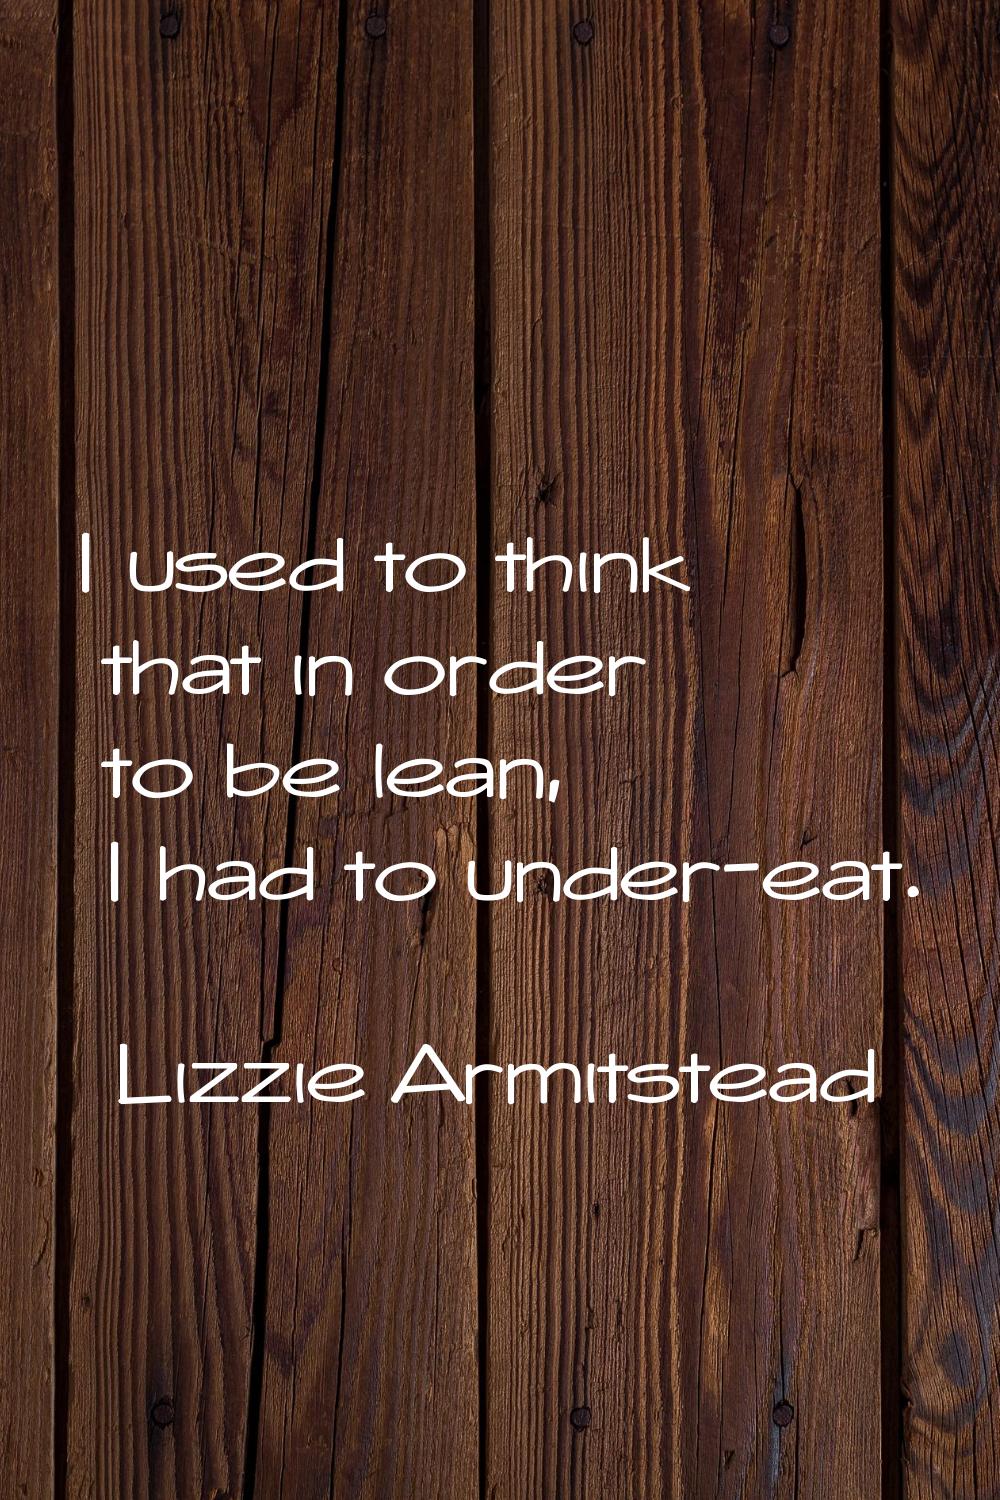 I used to think that in order to be lean, I had to under-eat.